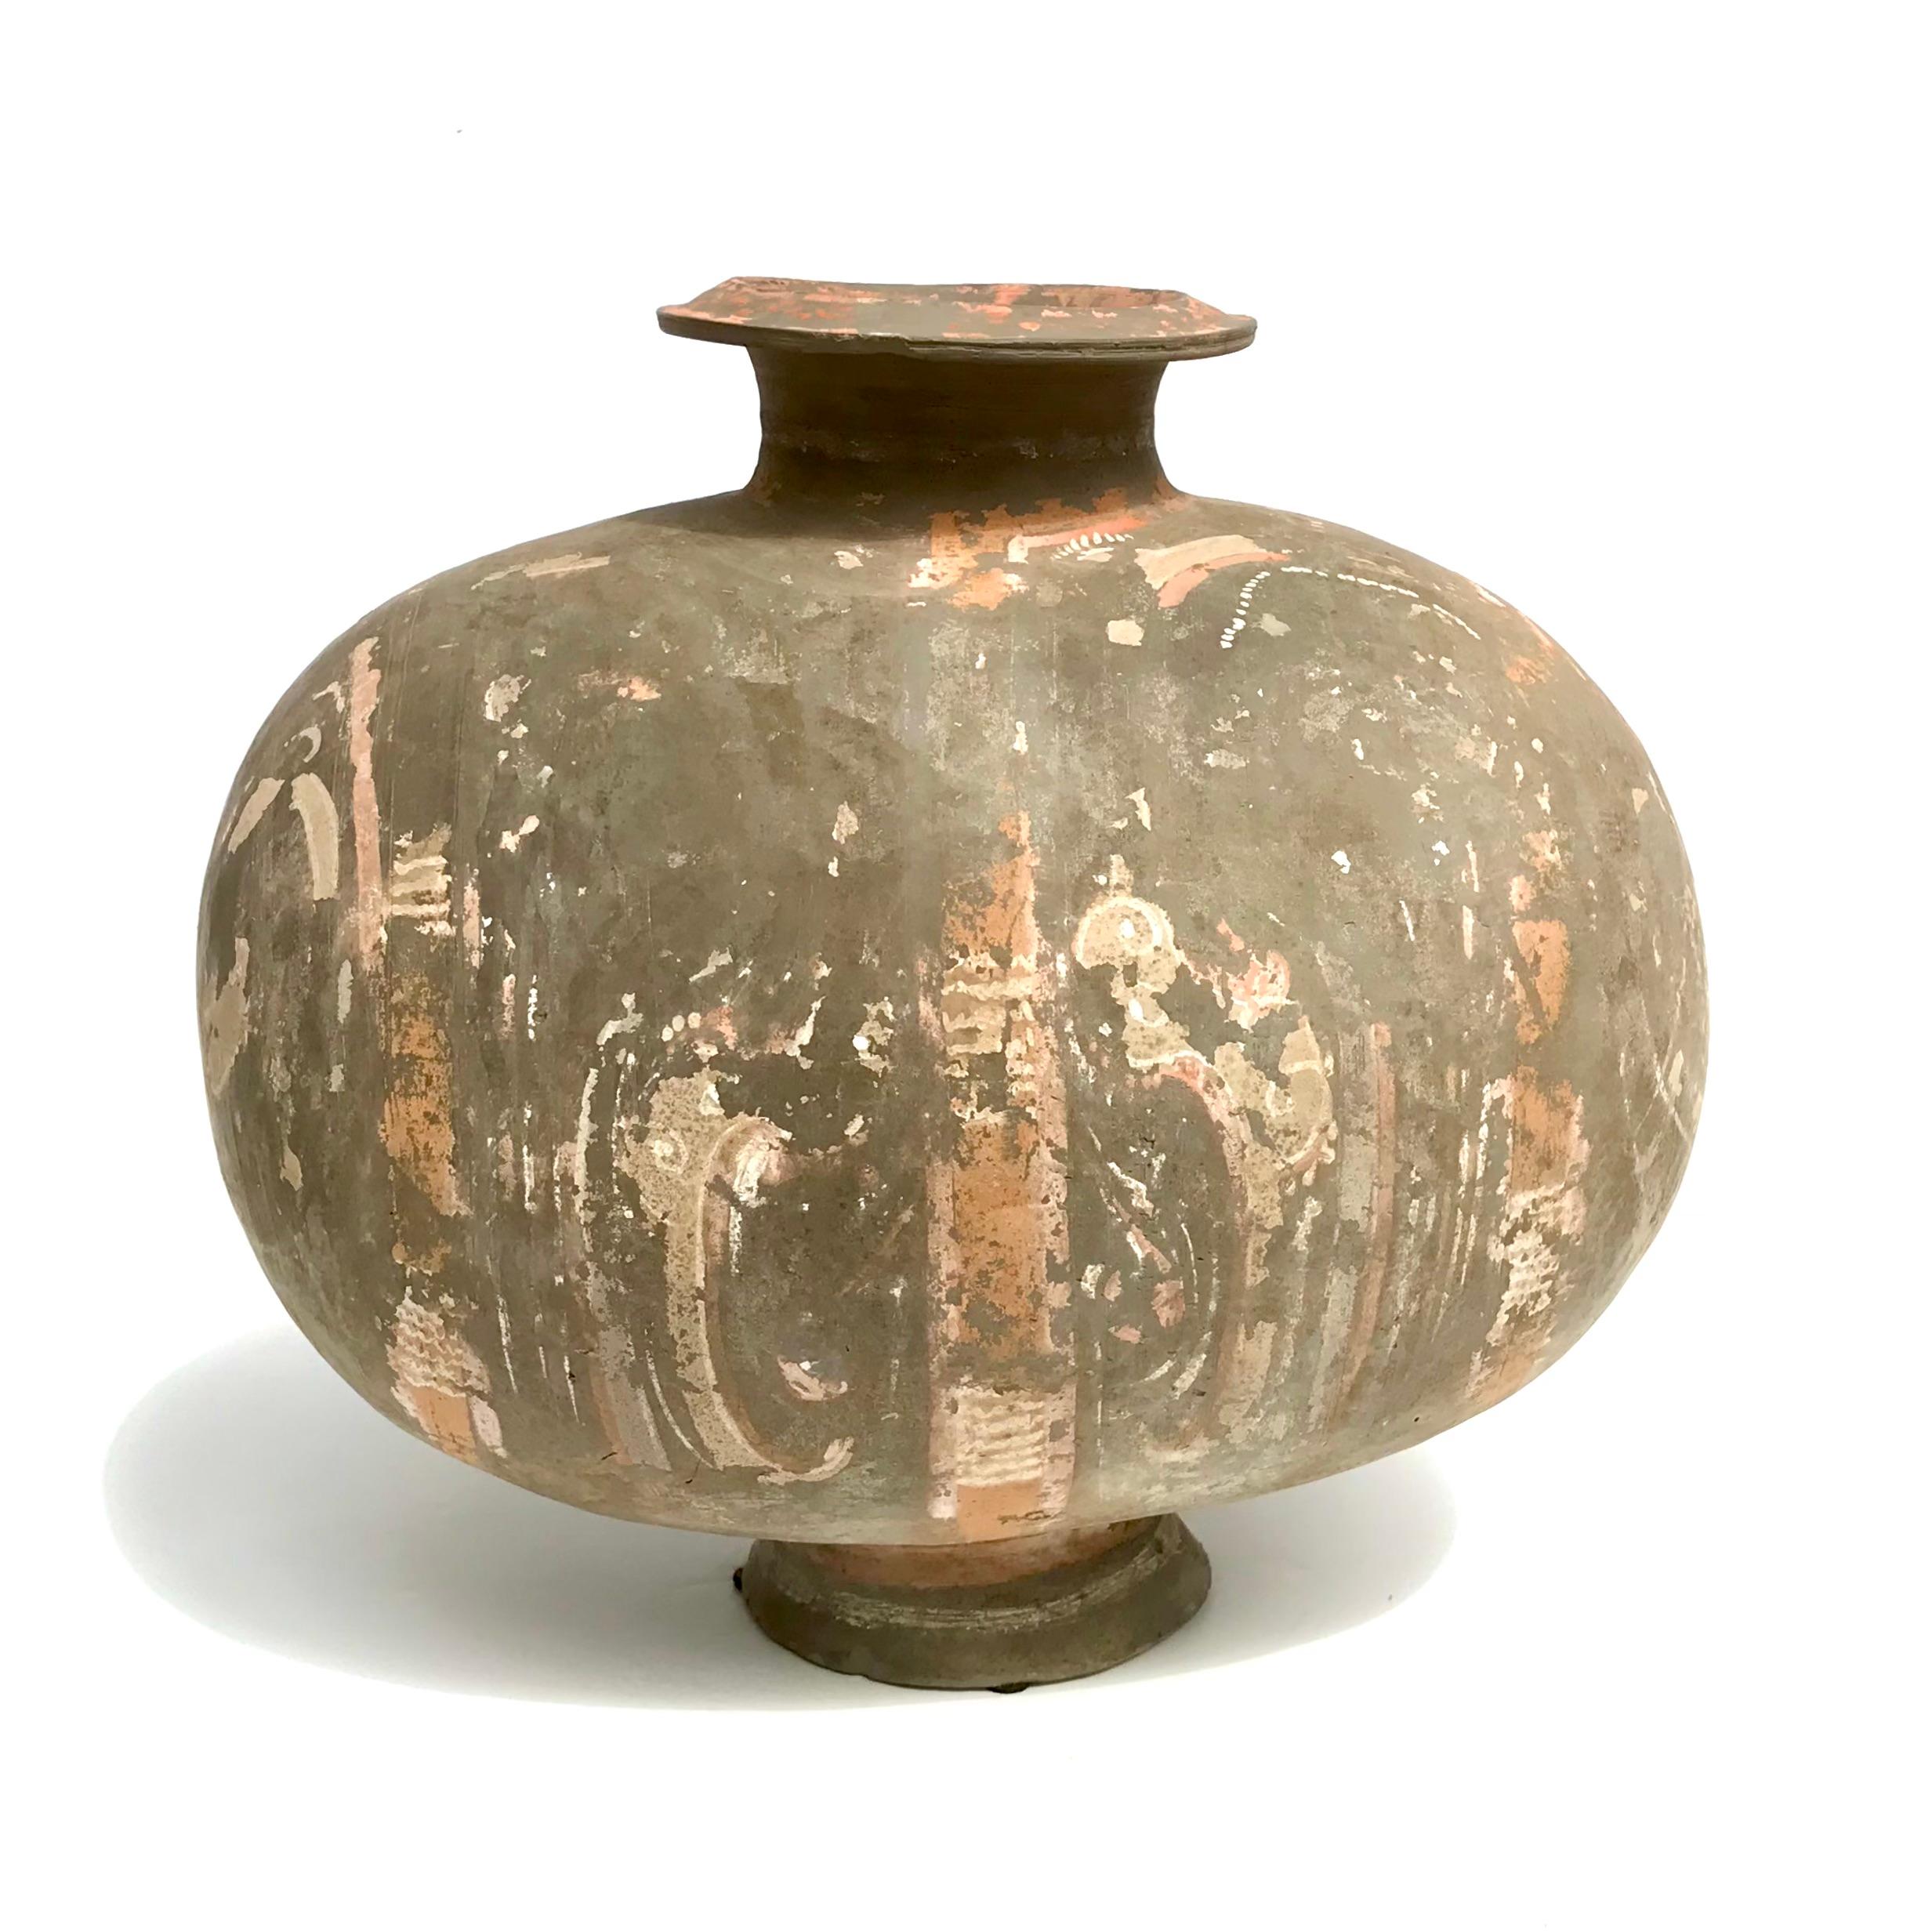 Chinese Han Dynasty earthenware cocoon jar

Cocoon jars or Cocoon-shaped jars are funerary pottery vessels in China, belonging to the period of the 1st millennium BCE. The shape is similar to the Cypriot Barrel-shaped jugs, as is generally the